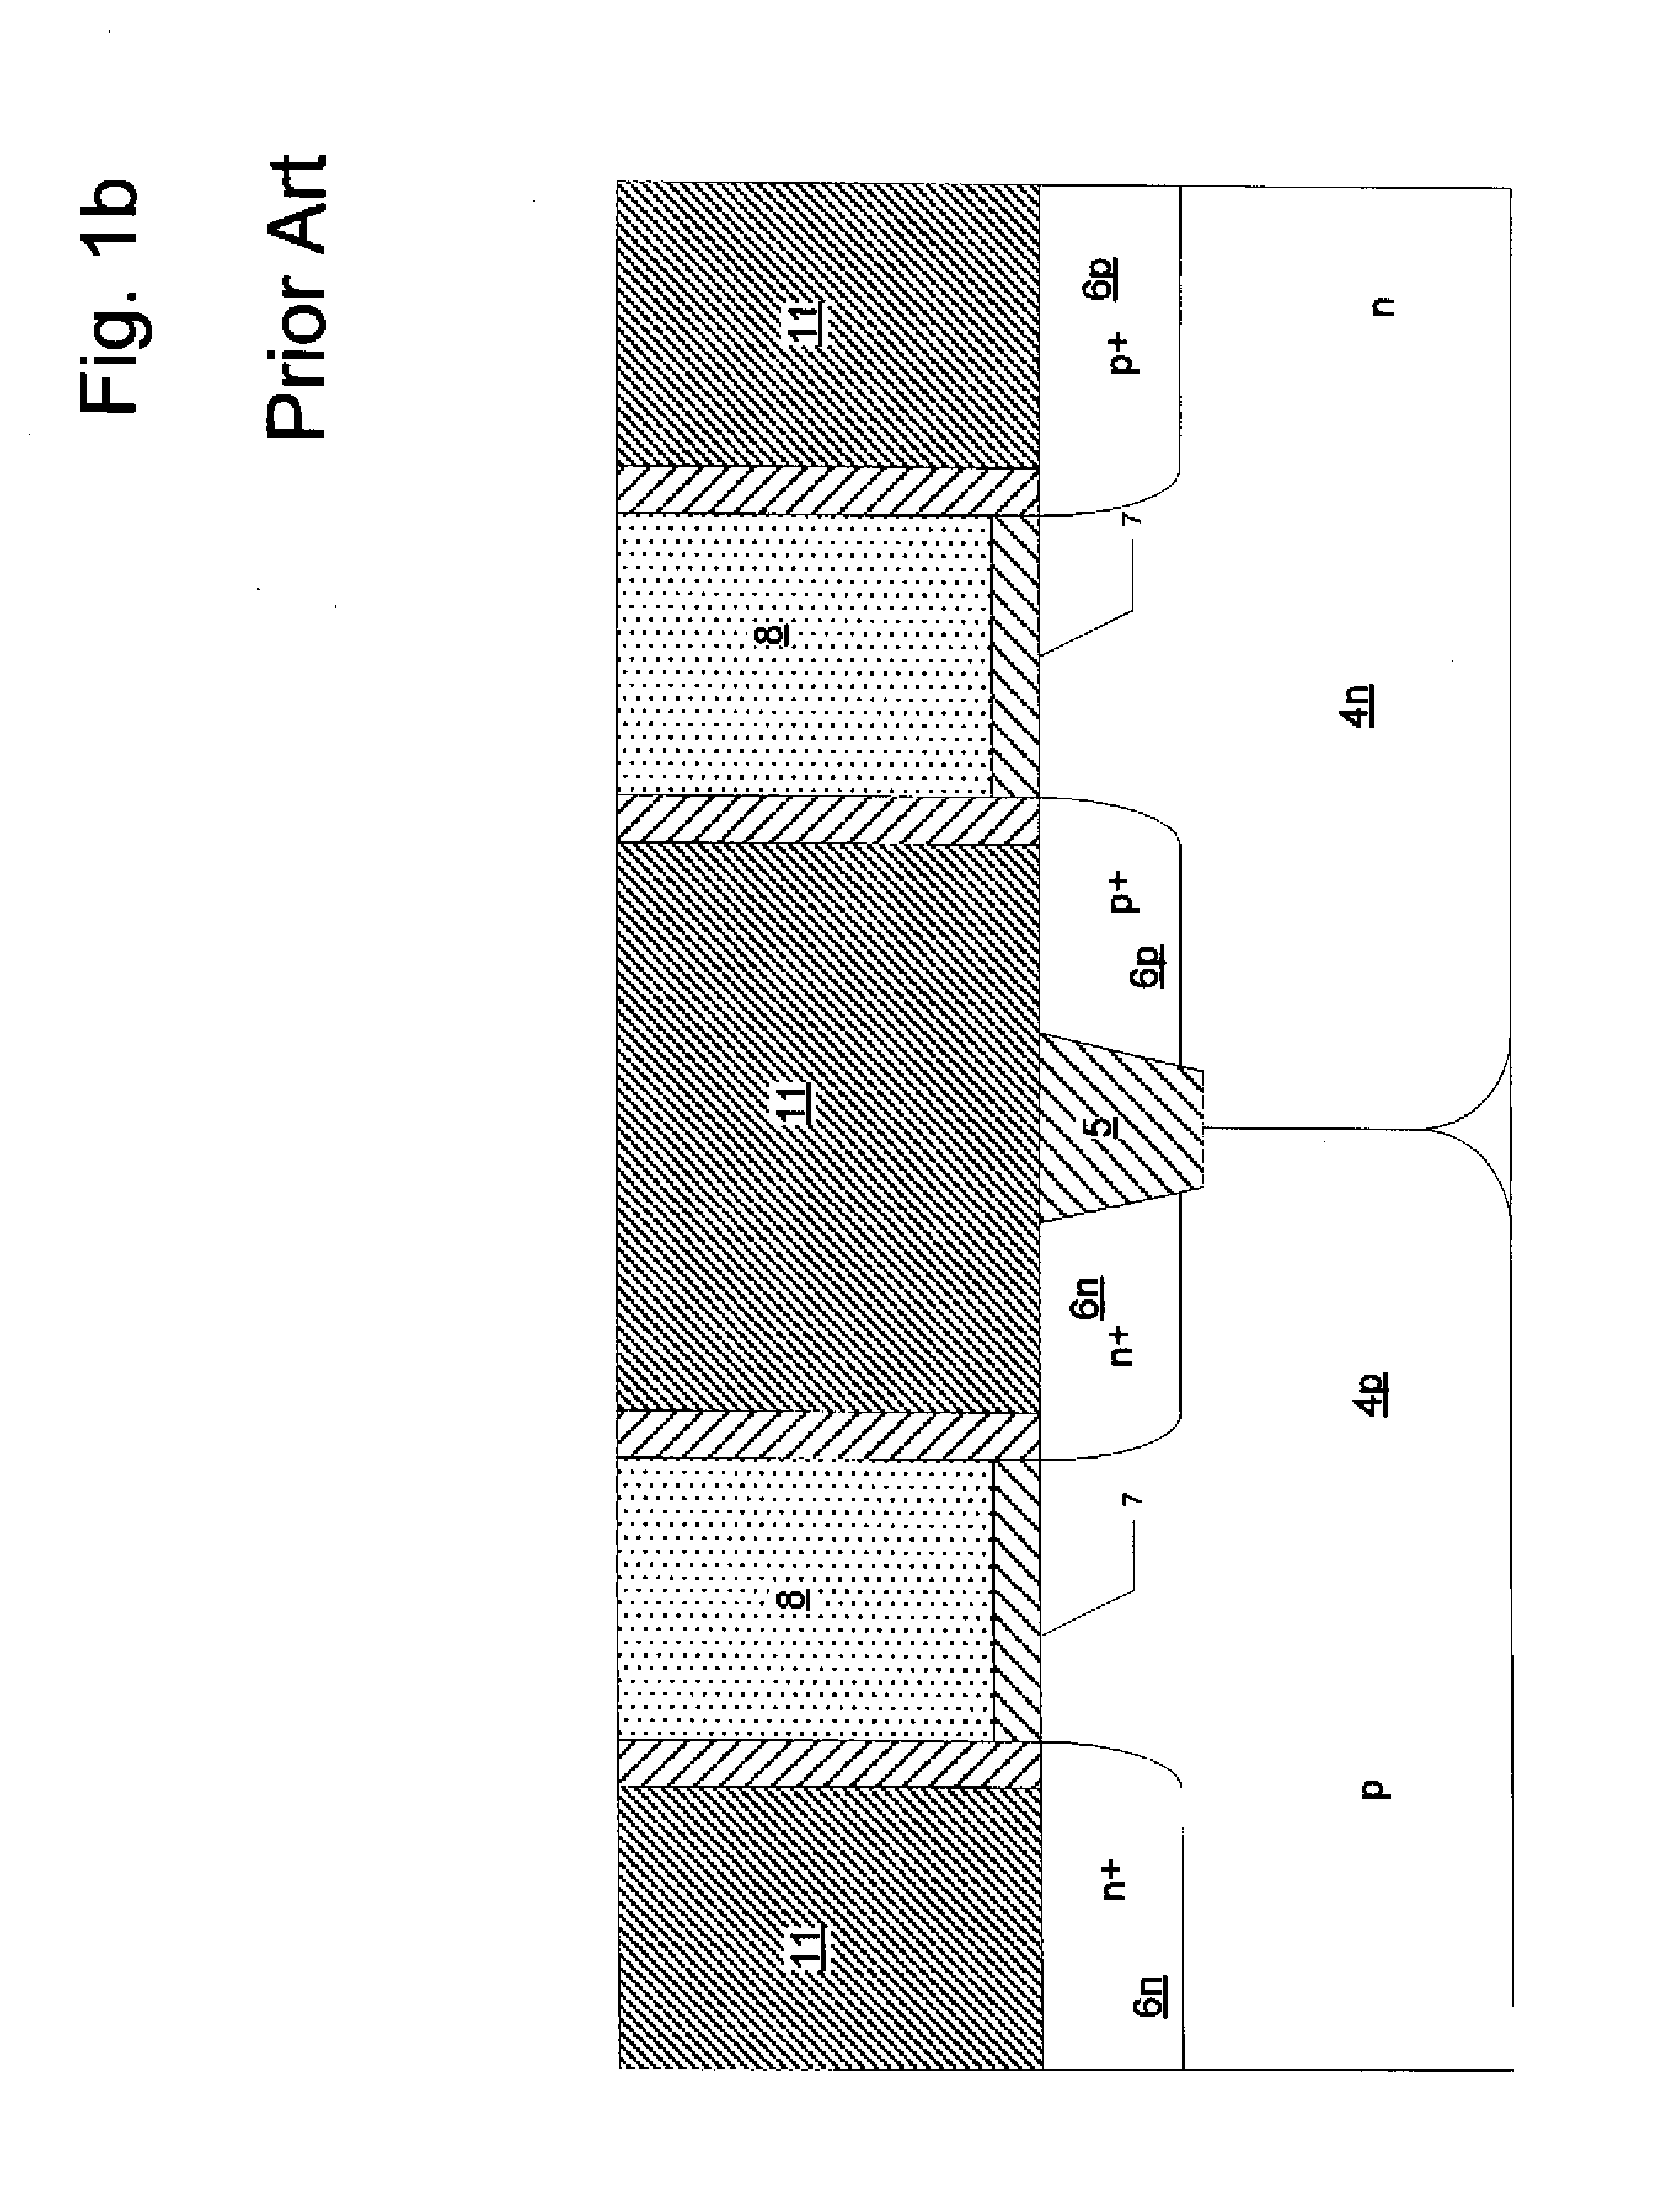 Replacement Metal Gate Process for CMOS Integrated Circuits